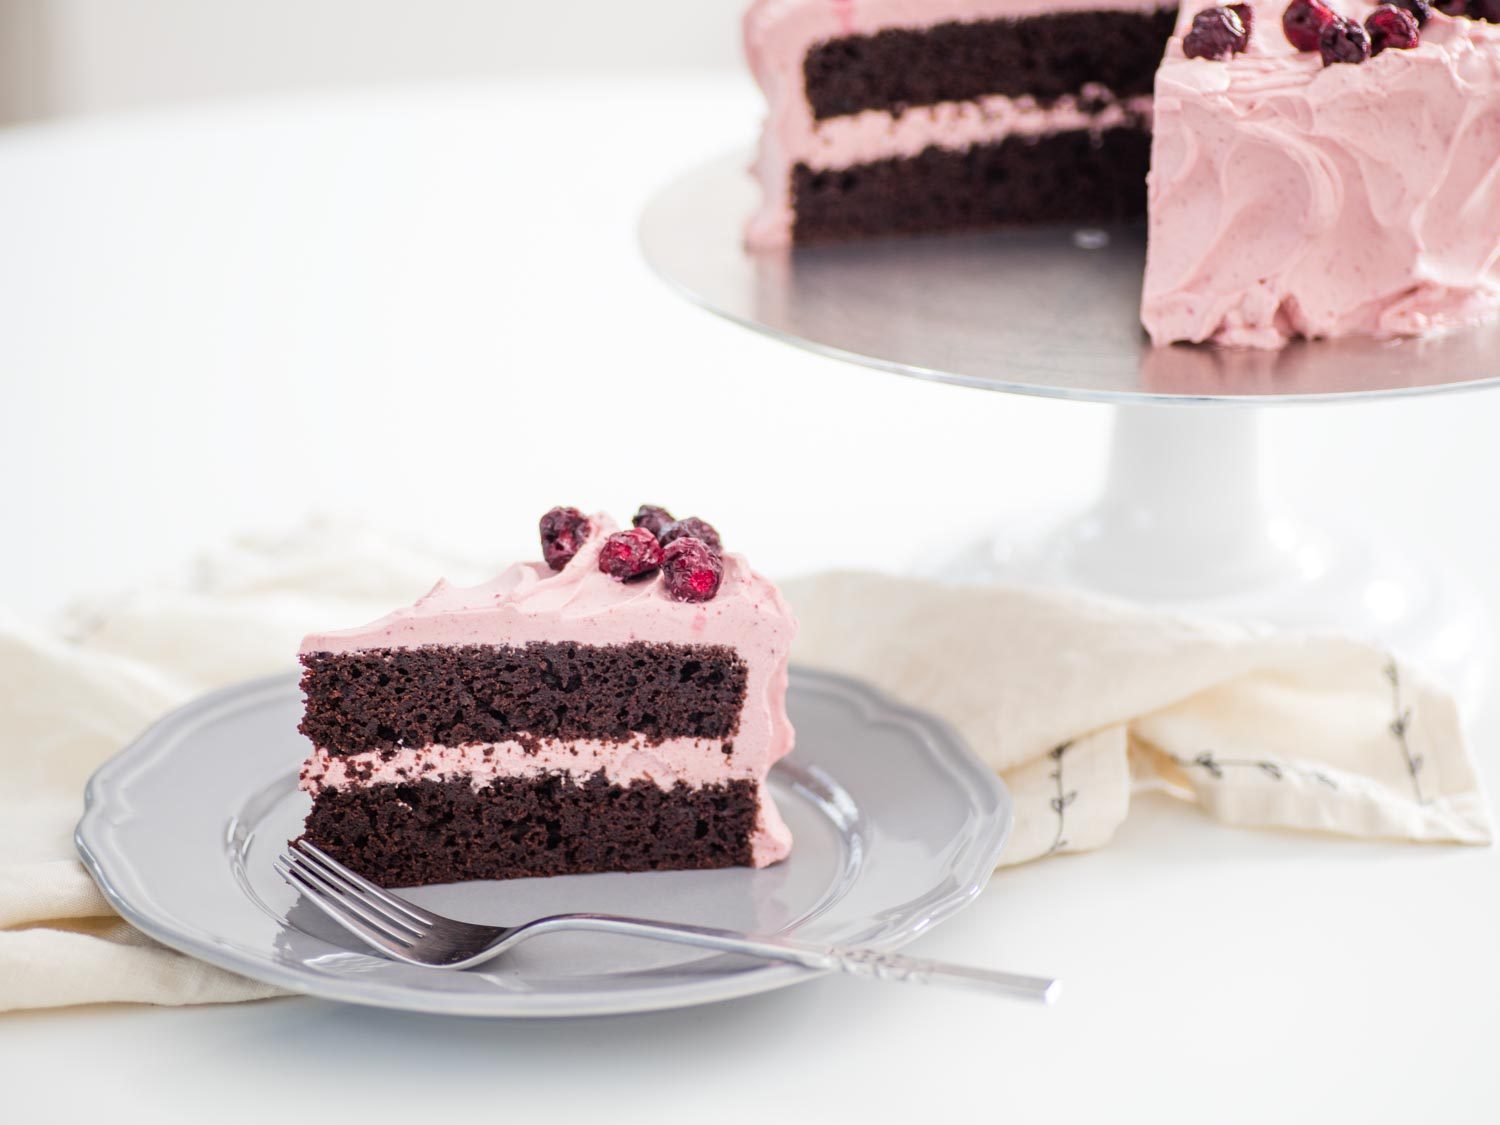 A slice of chocolate cherry layer cake on a plate, next to the rest of the cake on a cake stand